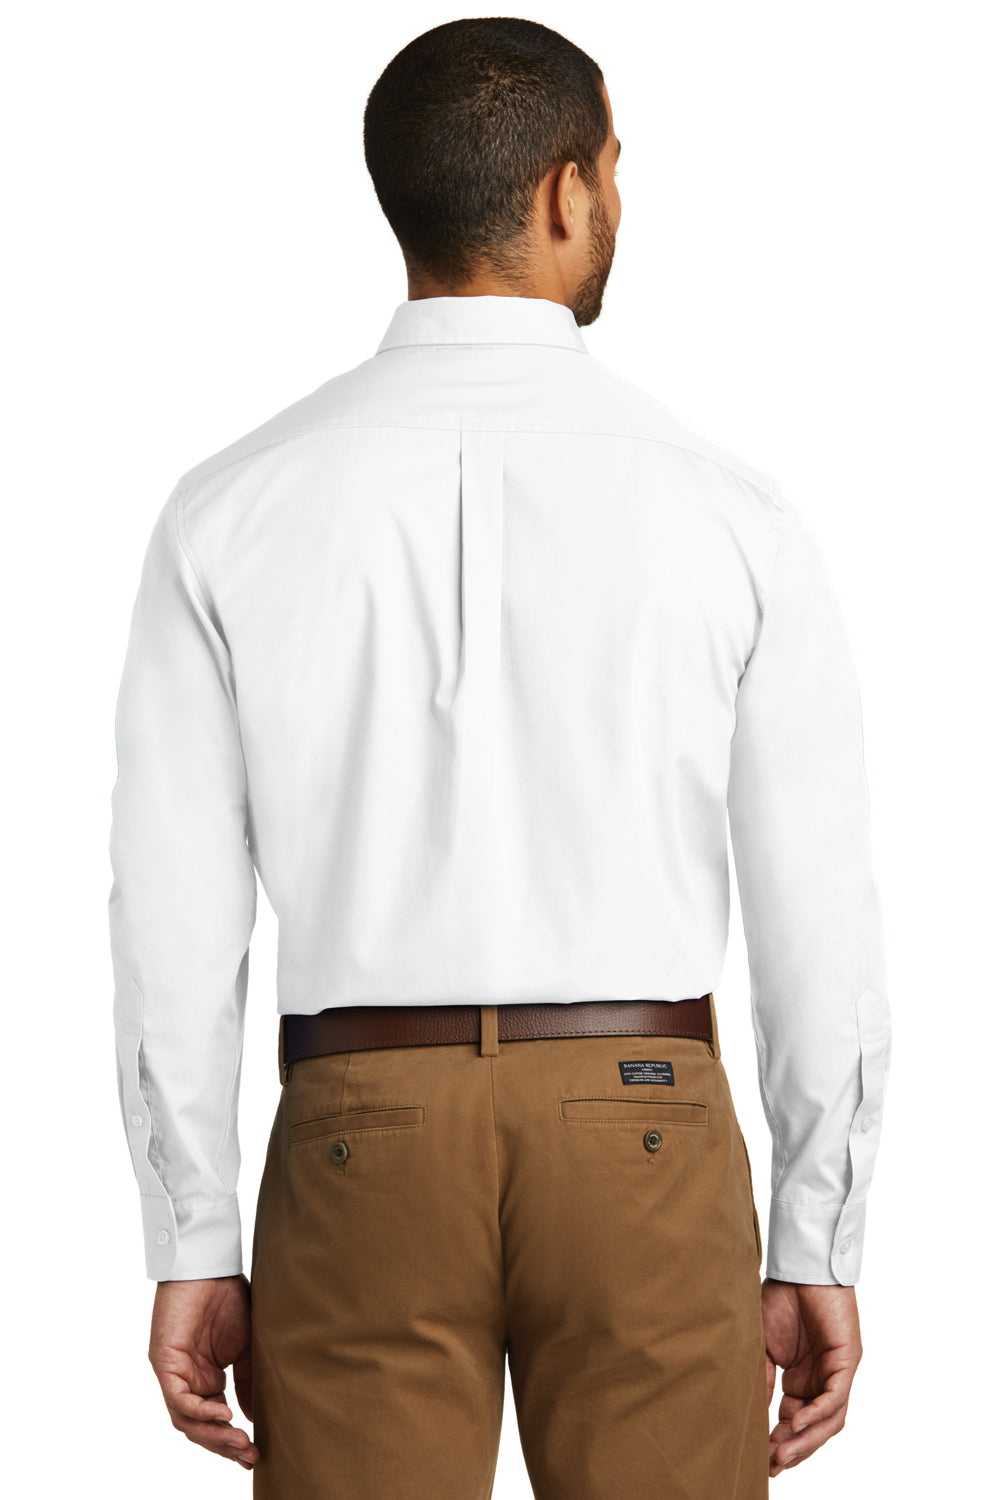 Port Authority W100 Mens Carefree Stain Resistant Long Sleeve Button Down Shirt w/ Pocket White Back